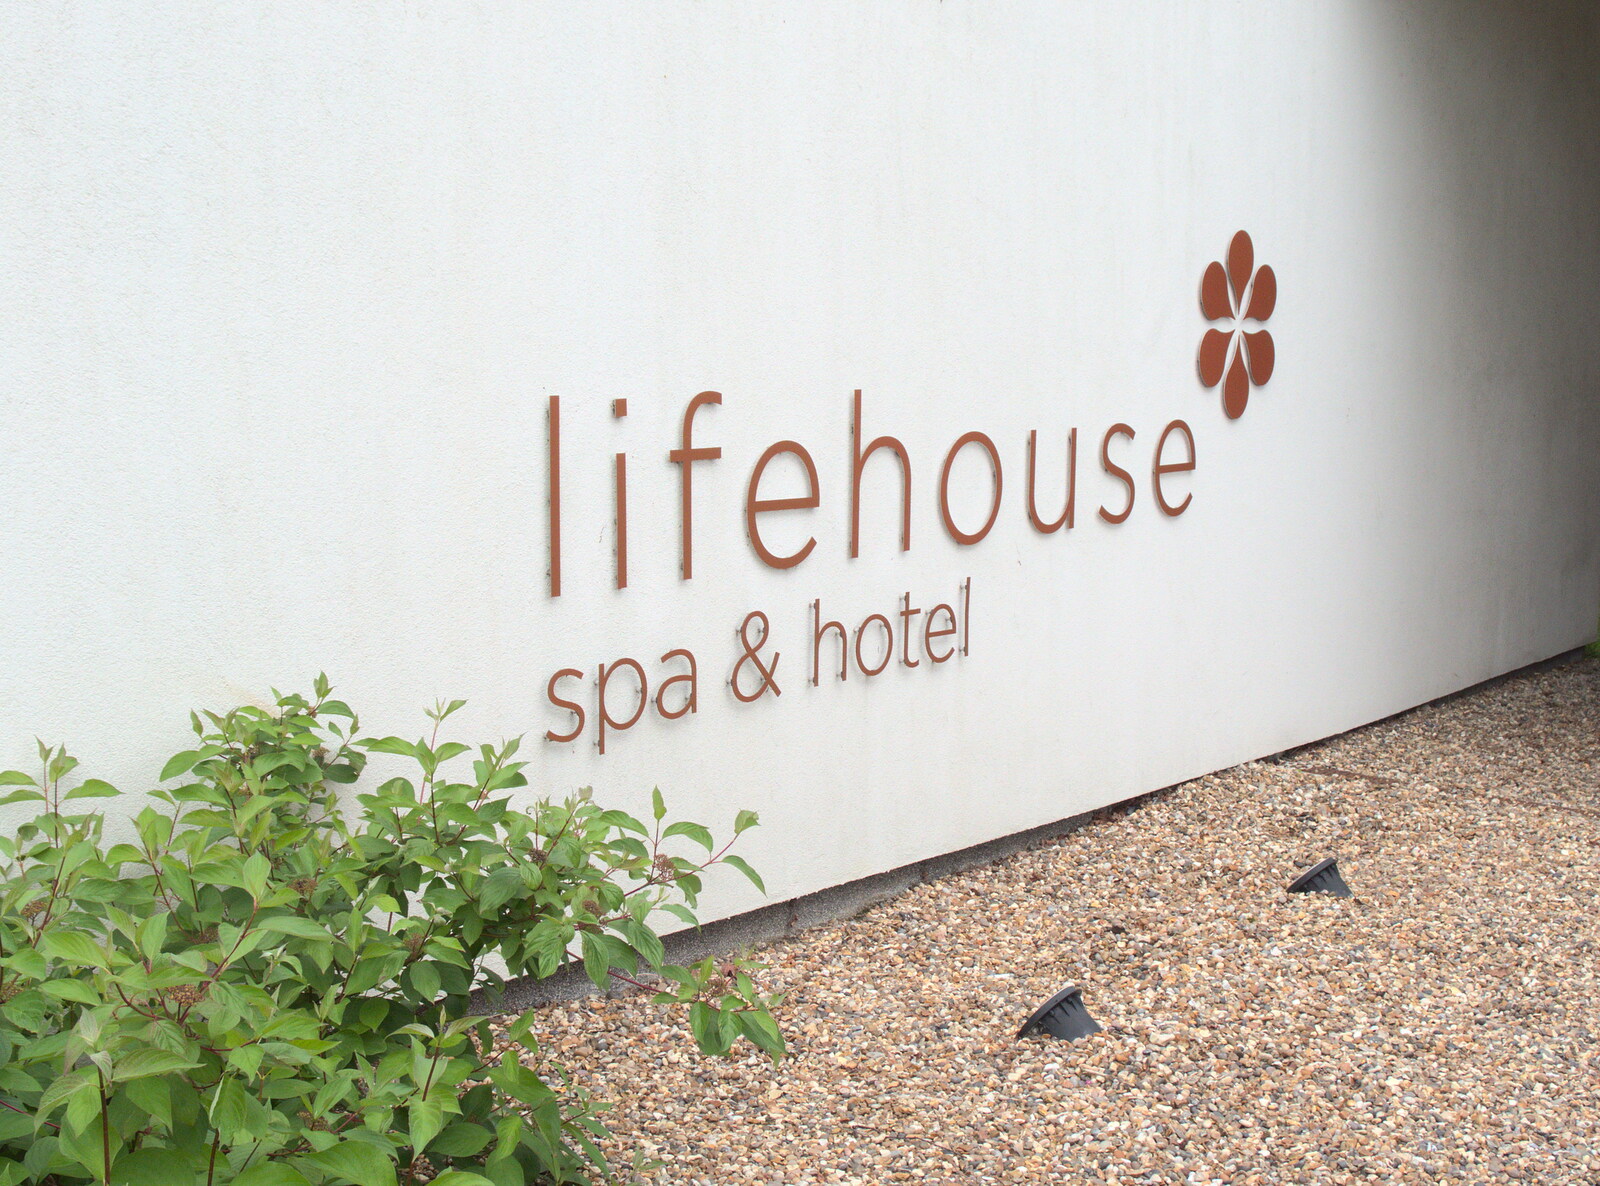 The Lifehouse sign from Lifehouse and Thorpe Hall Gardens, Thorpe-le-Soken, Essex - 11th June 2017